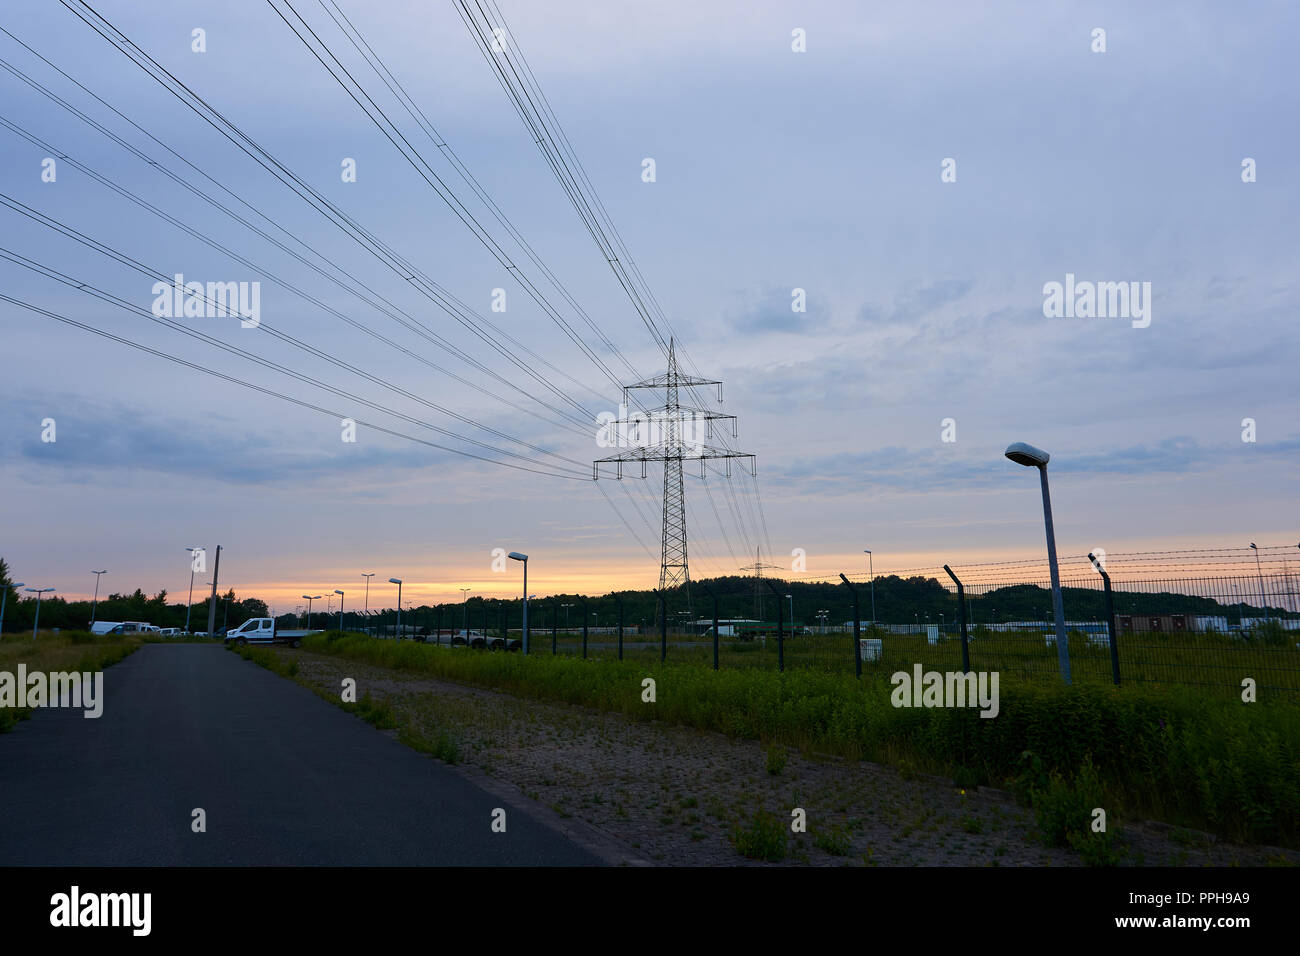 power pole in a sunset with wires Stock Photo